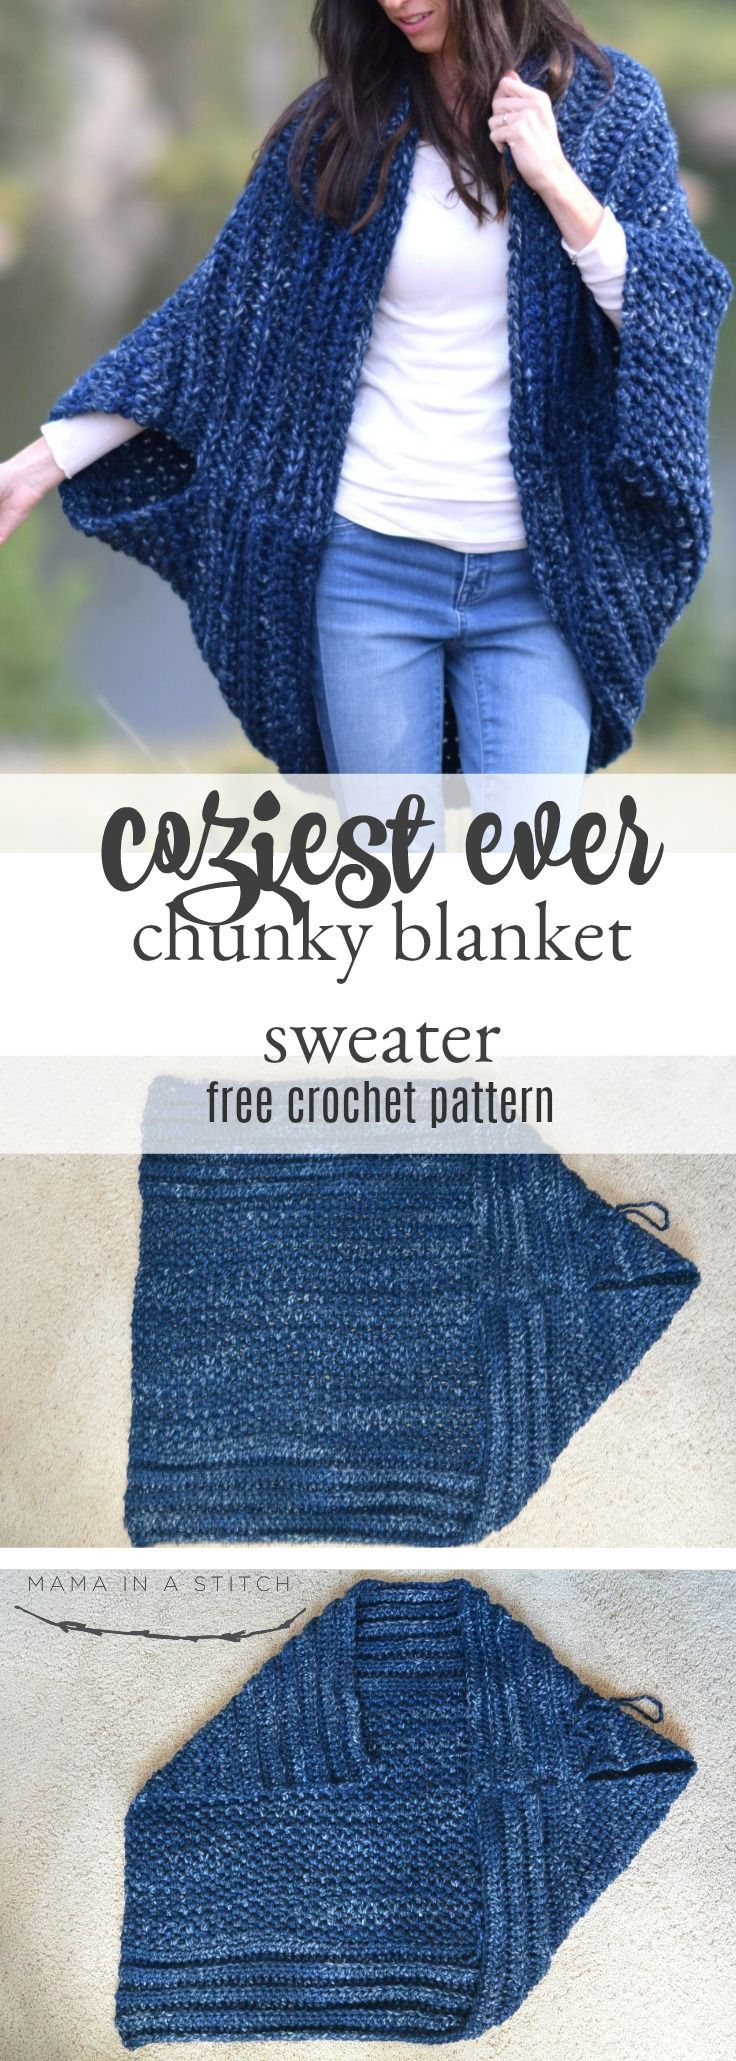 Oh my - I am SO excited to share this new crocheted blanket cardigan with you to